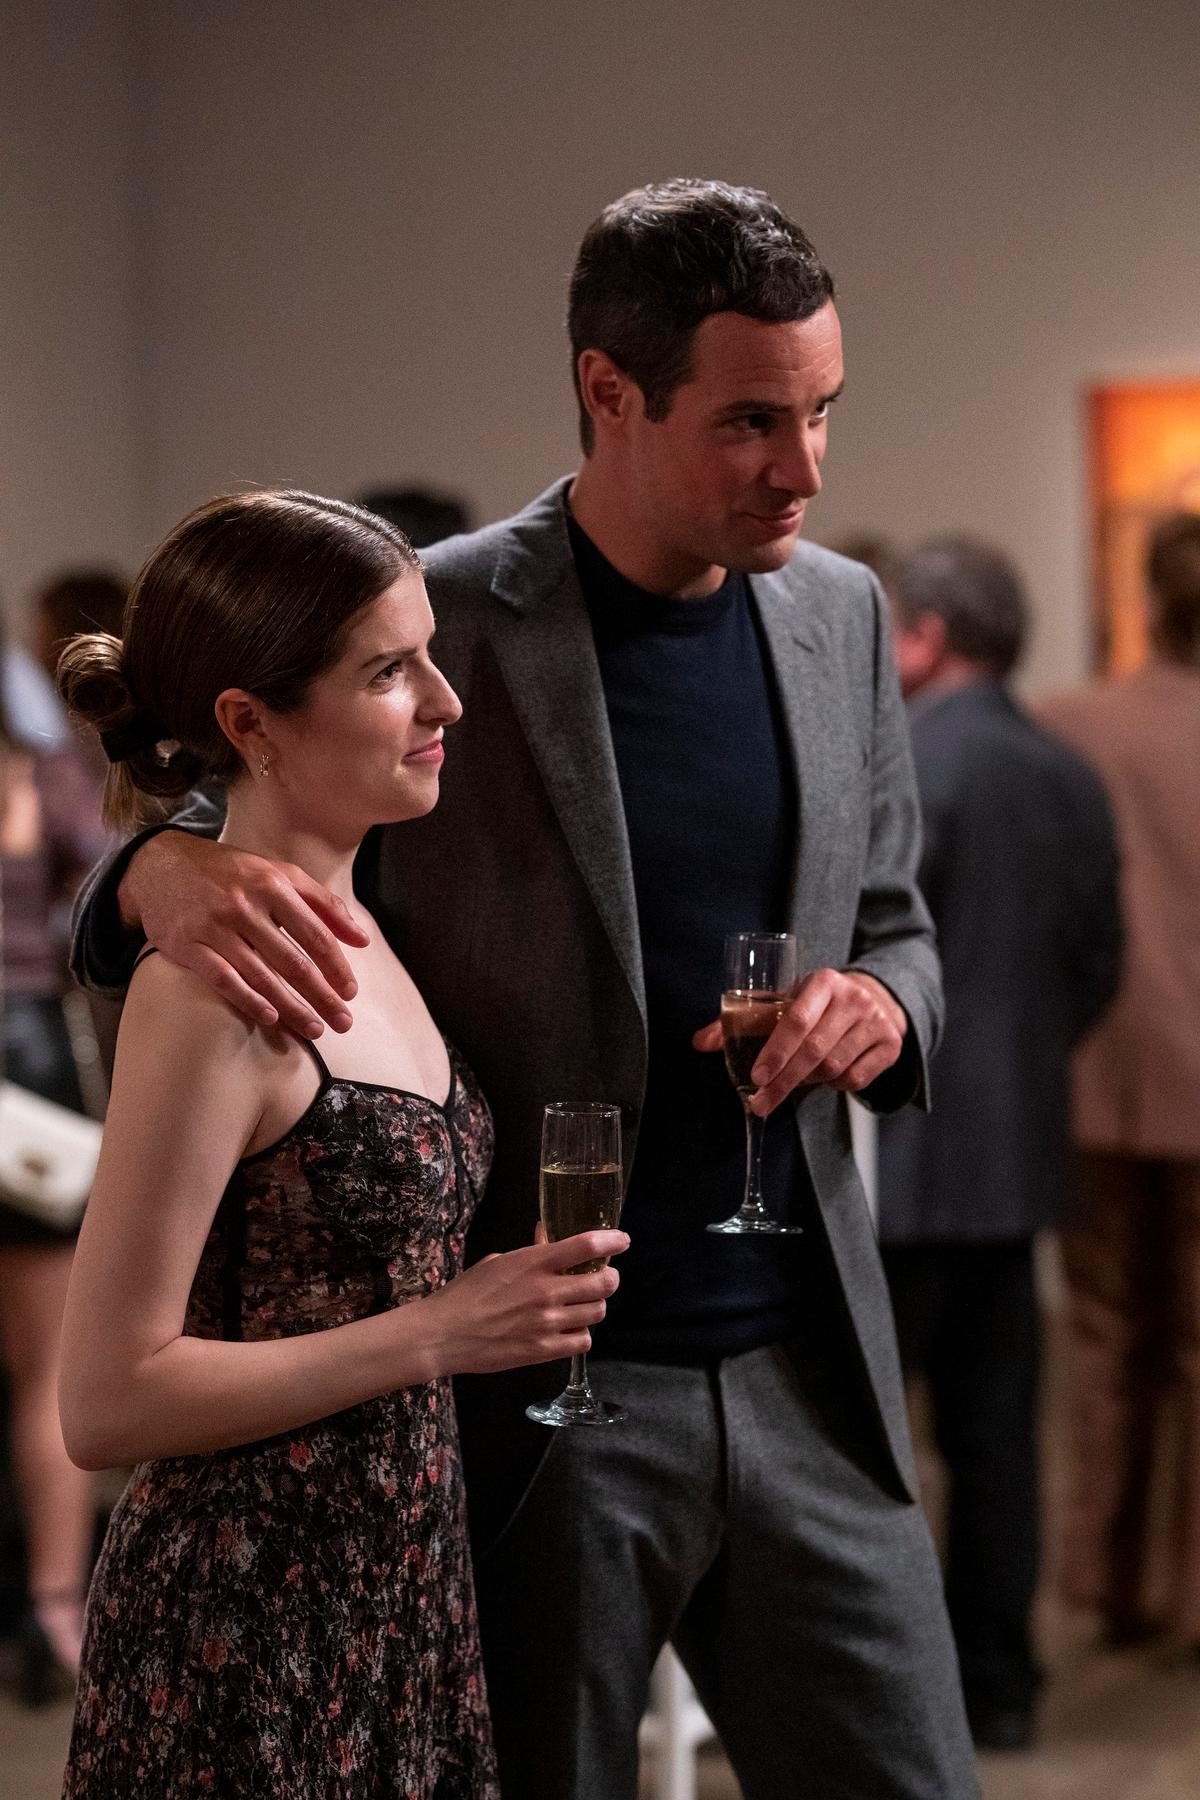 Alice (Anna Kendrick) with up-and-coming British artist boyfriend, Simon (Charlie Carrick), in "Alice, Darling." (Lionsgate)